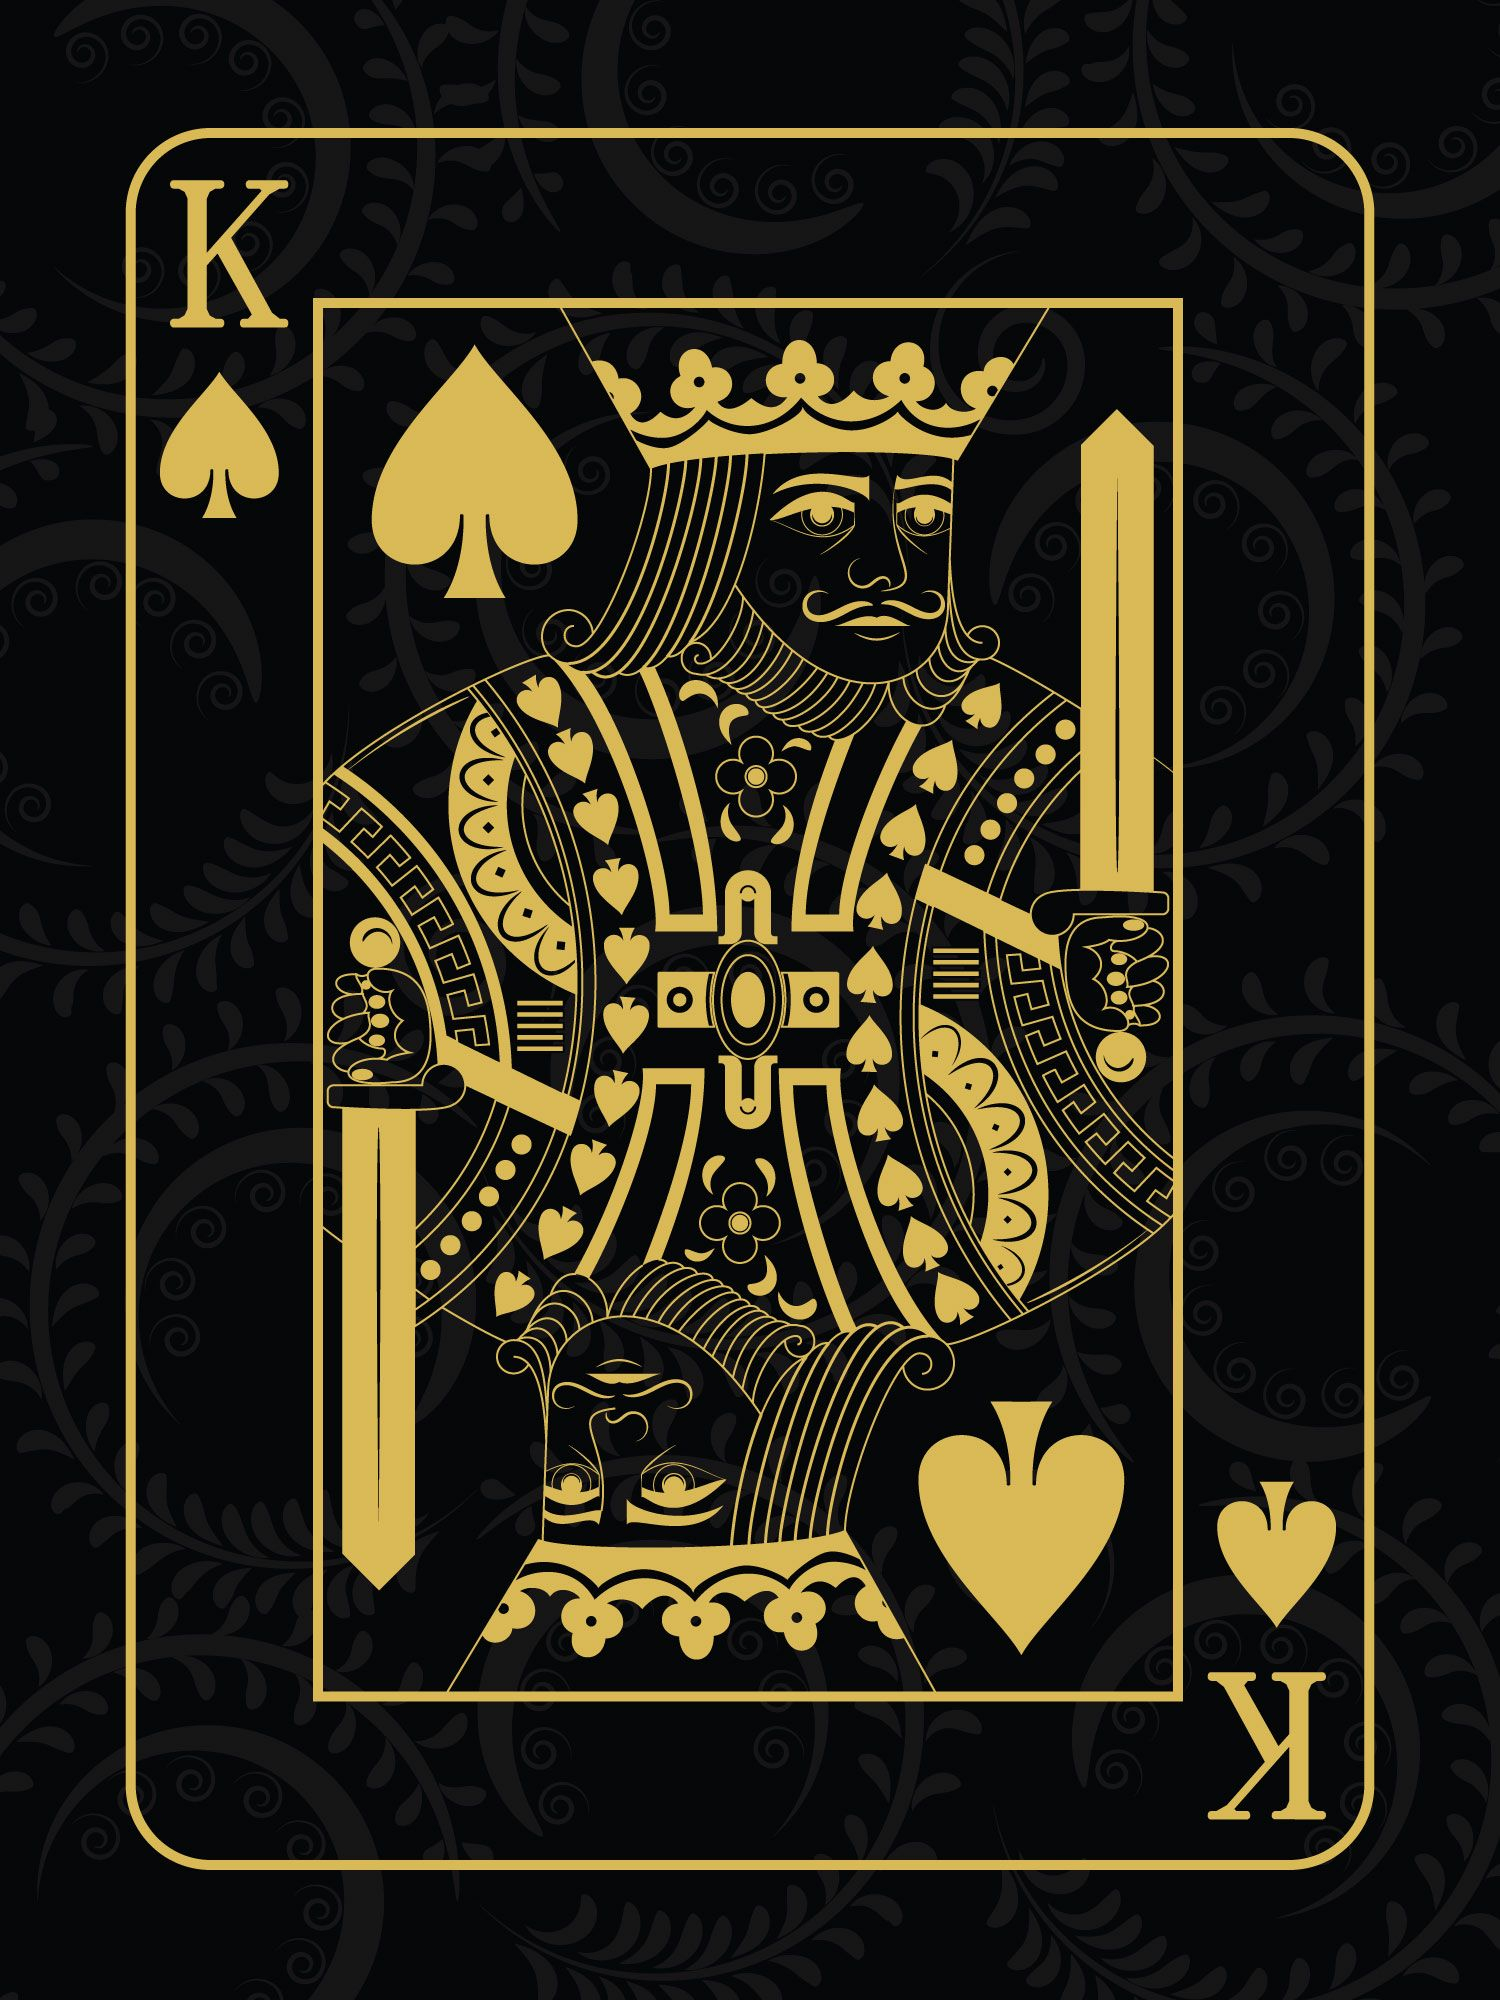 1500x2000 King Of Spades poster painting TenorArts | King card, Playing cards design, King of spades